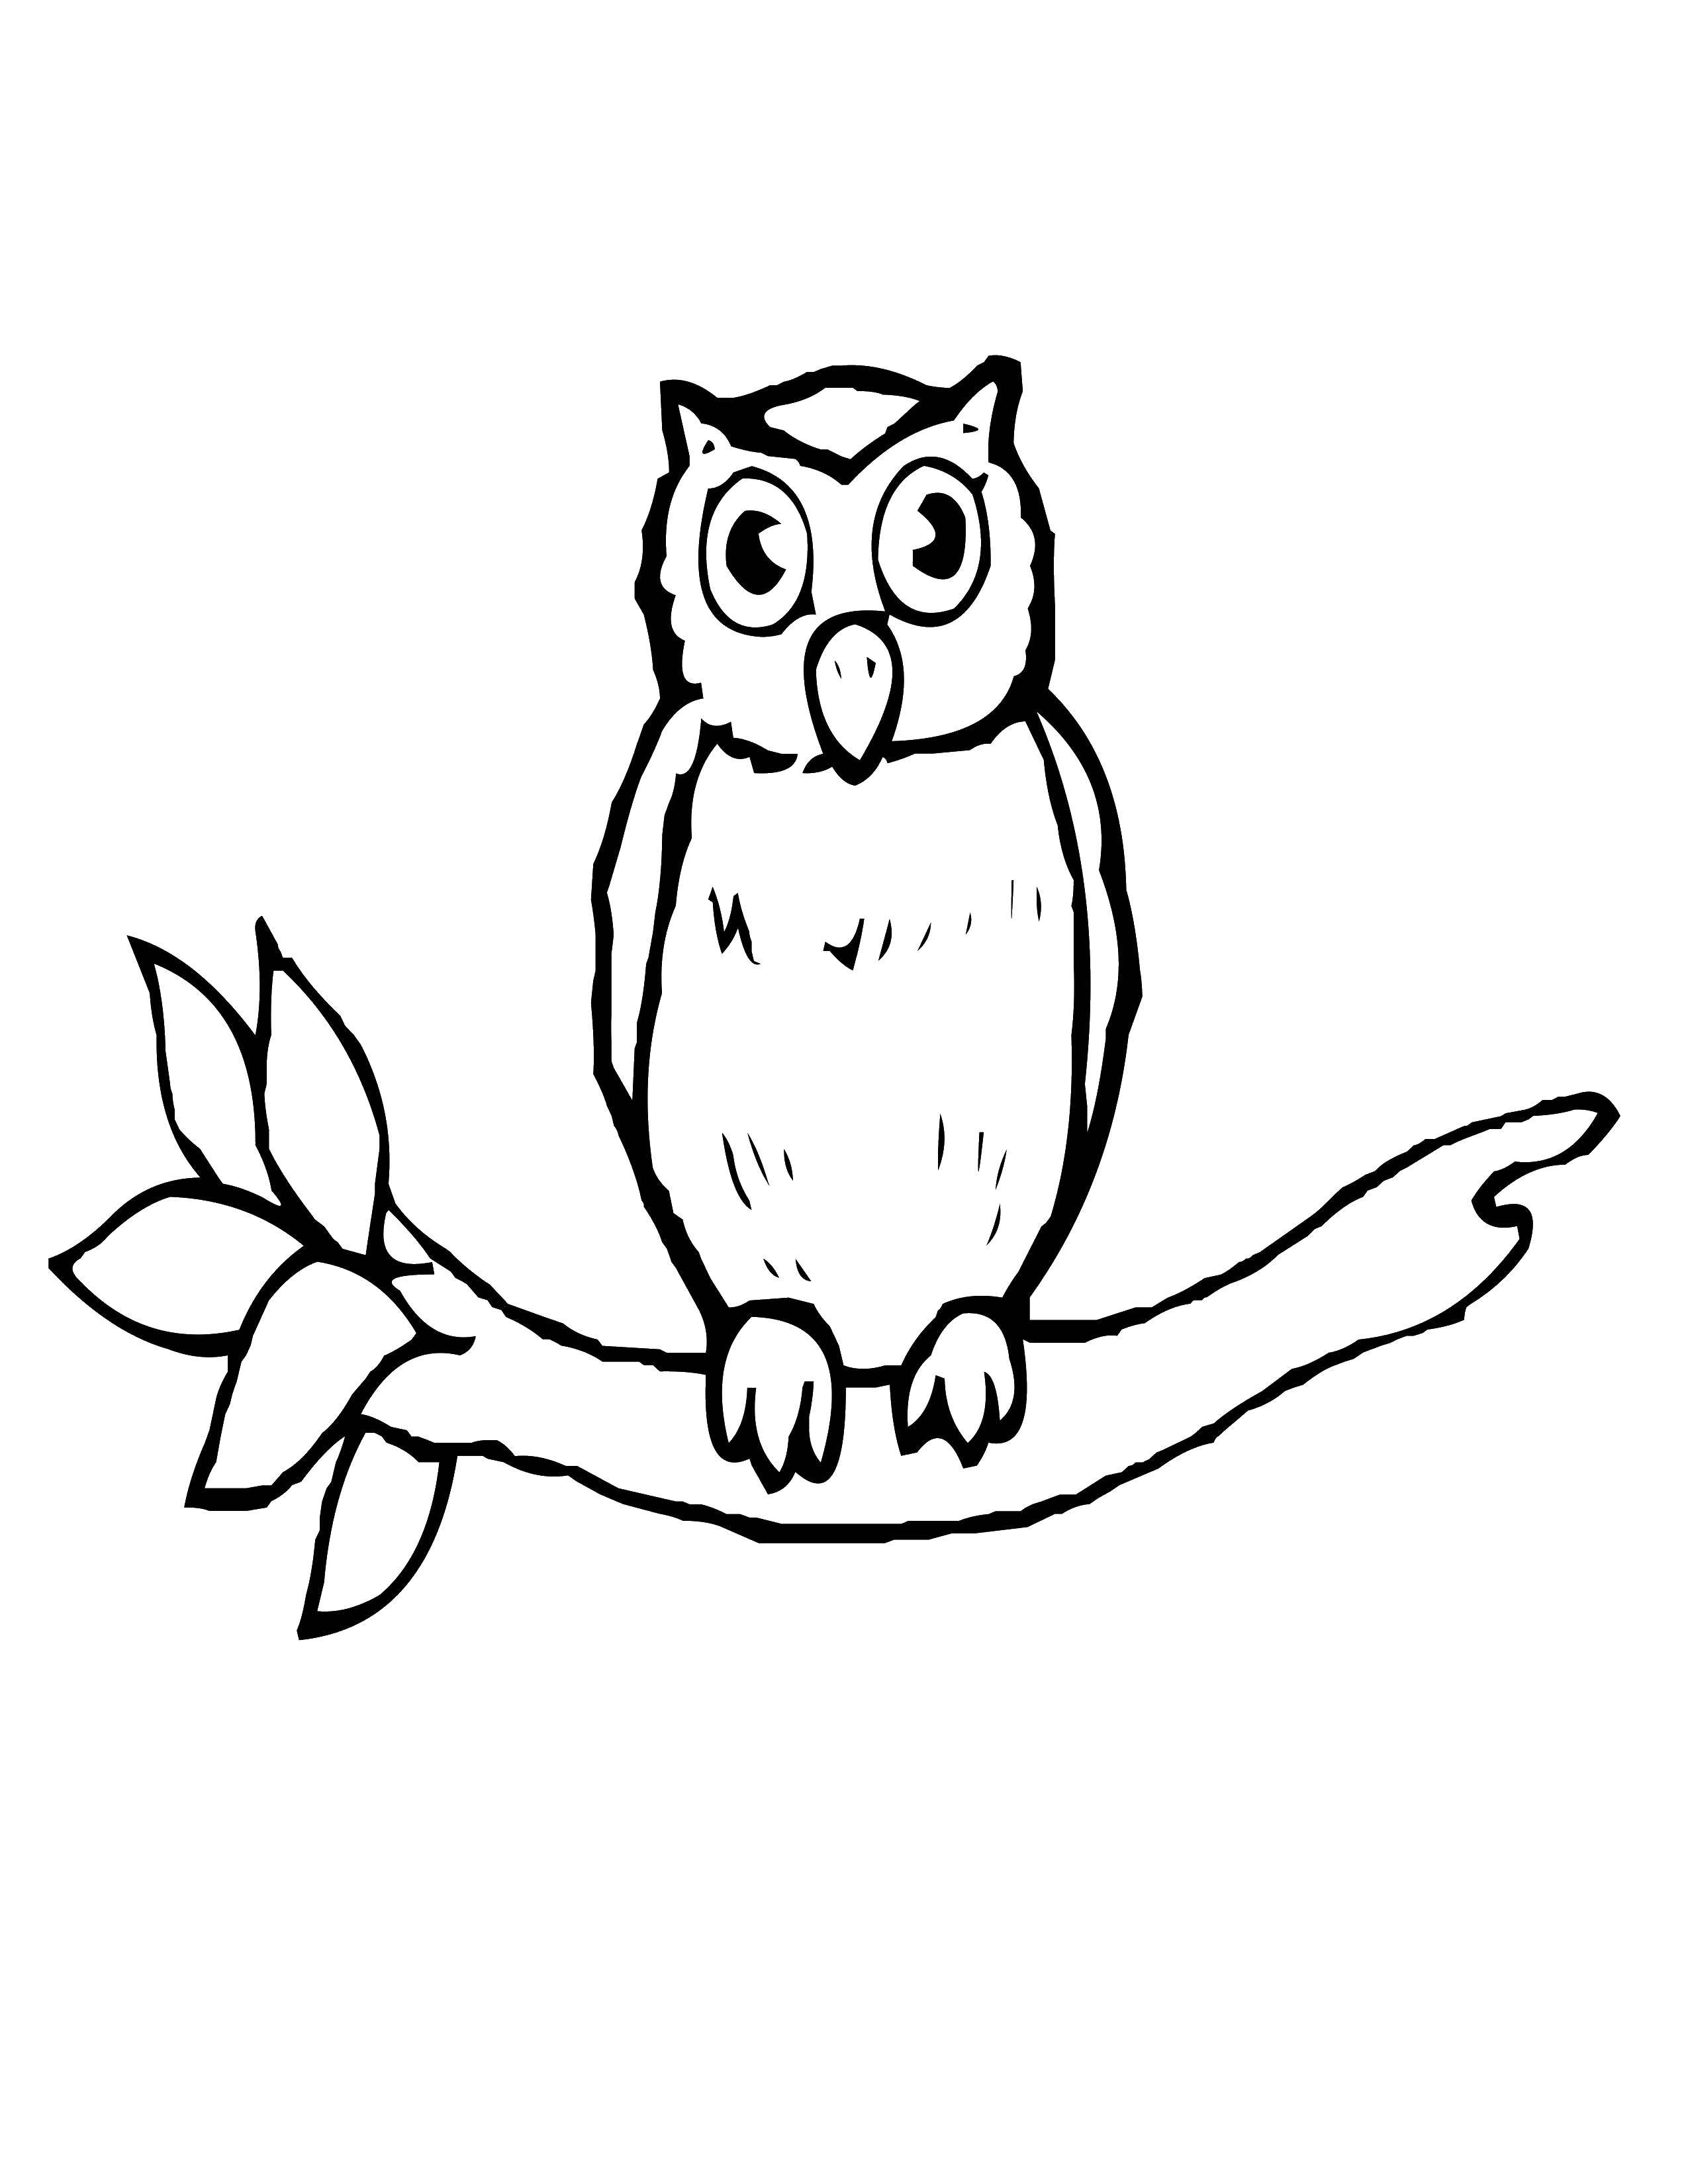 Coloring Owl on the branch. Category Animals. Tags:  animals, owl, bird.